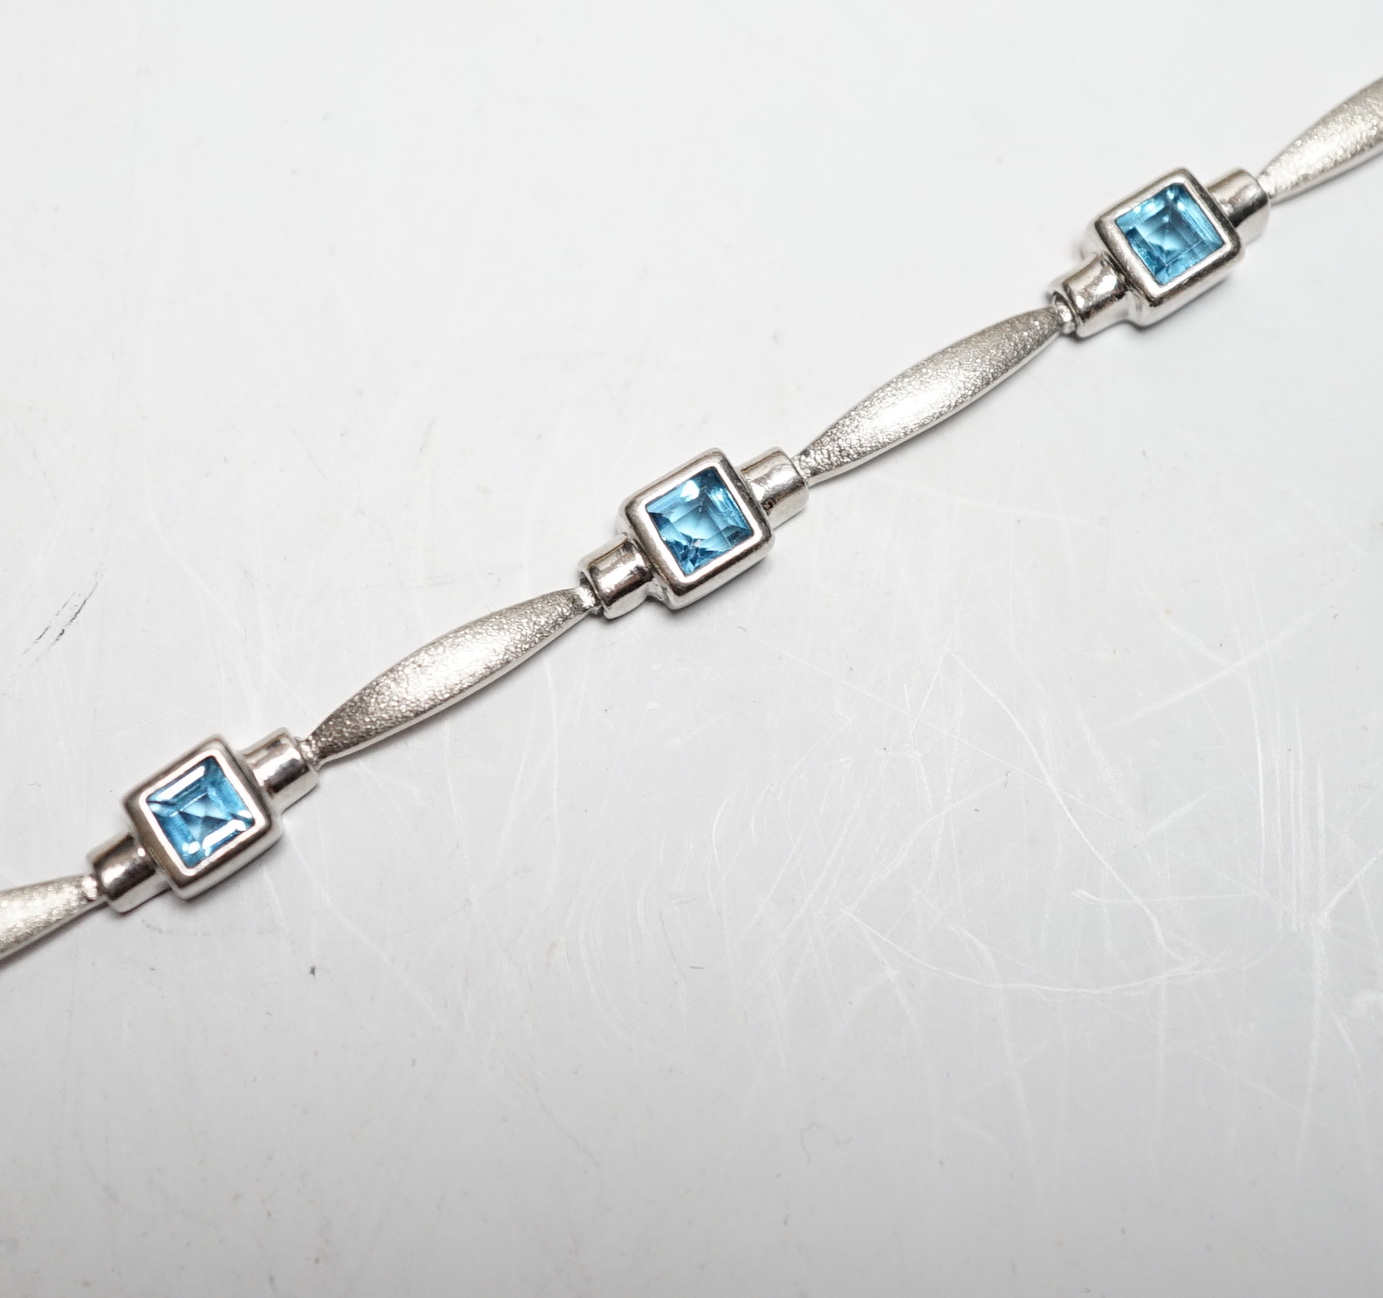 A modern brushed 9ct white gold and seven stone square cut blue topaz? set bracelet, 18cm, gross weight 8.5 grams.